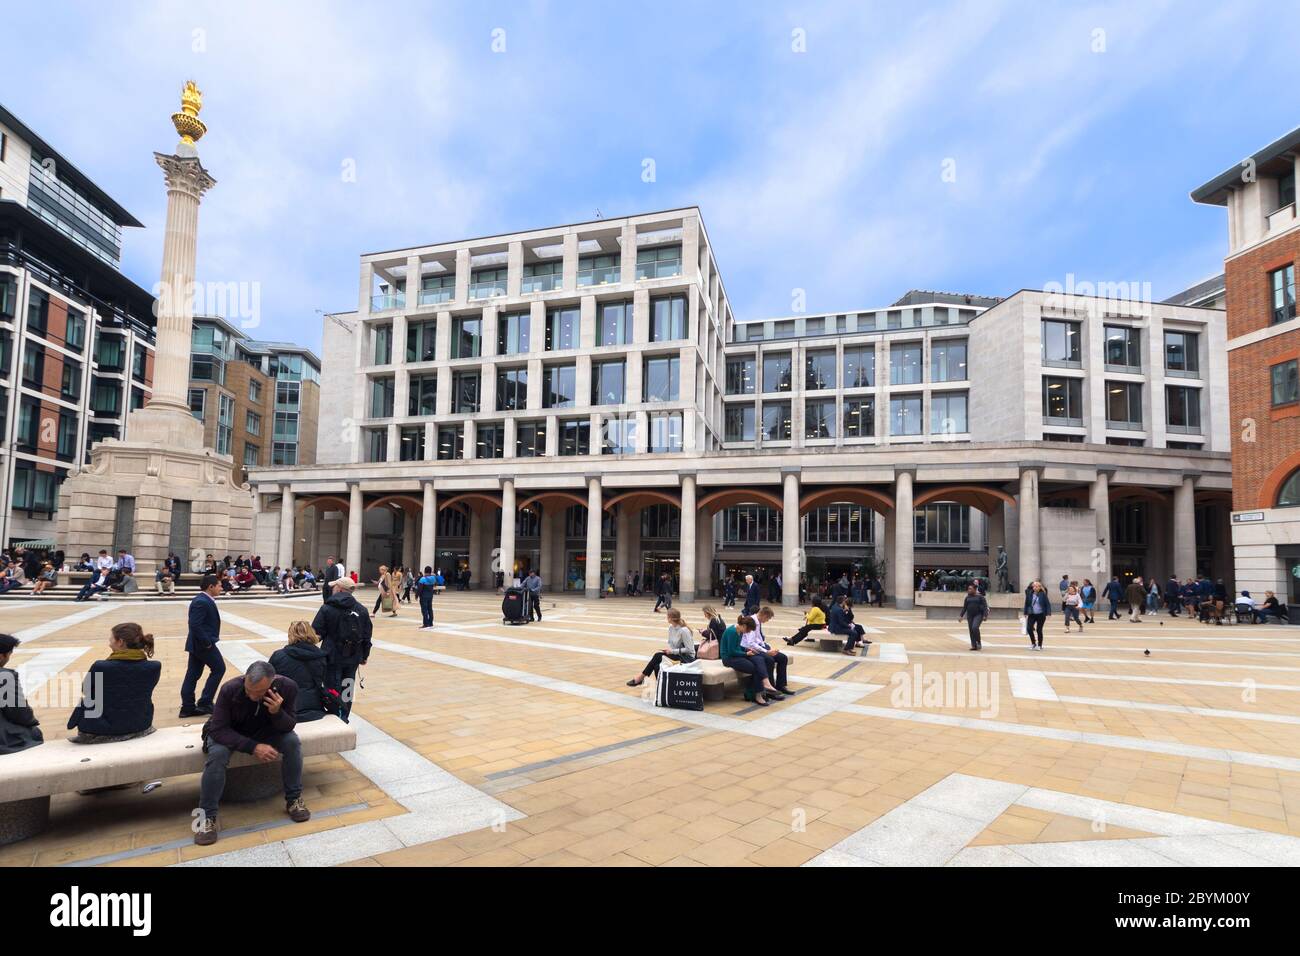 London Stock Exchange Group building and offices in Paternoster Square, City of London, England, UK. Stock Photo